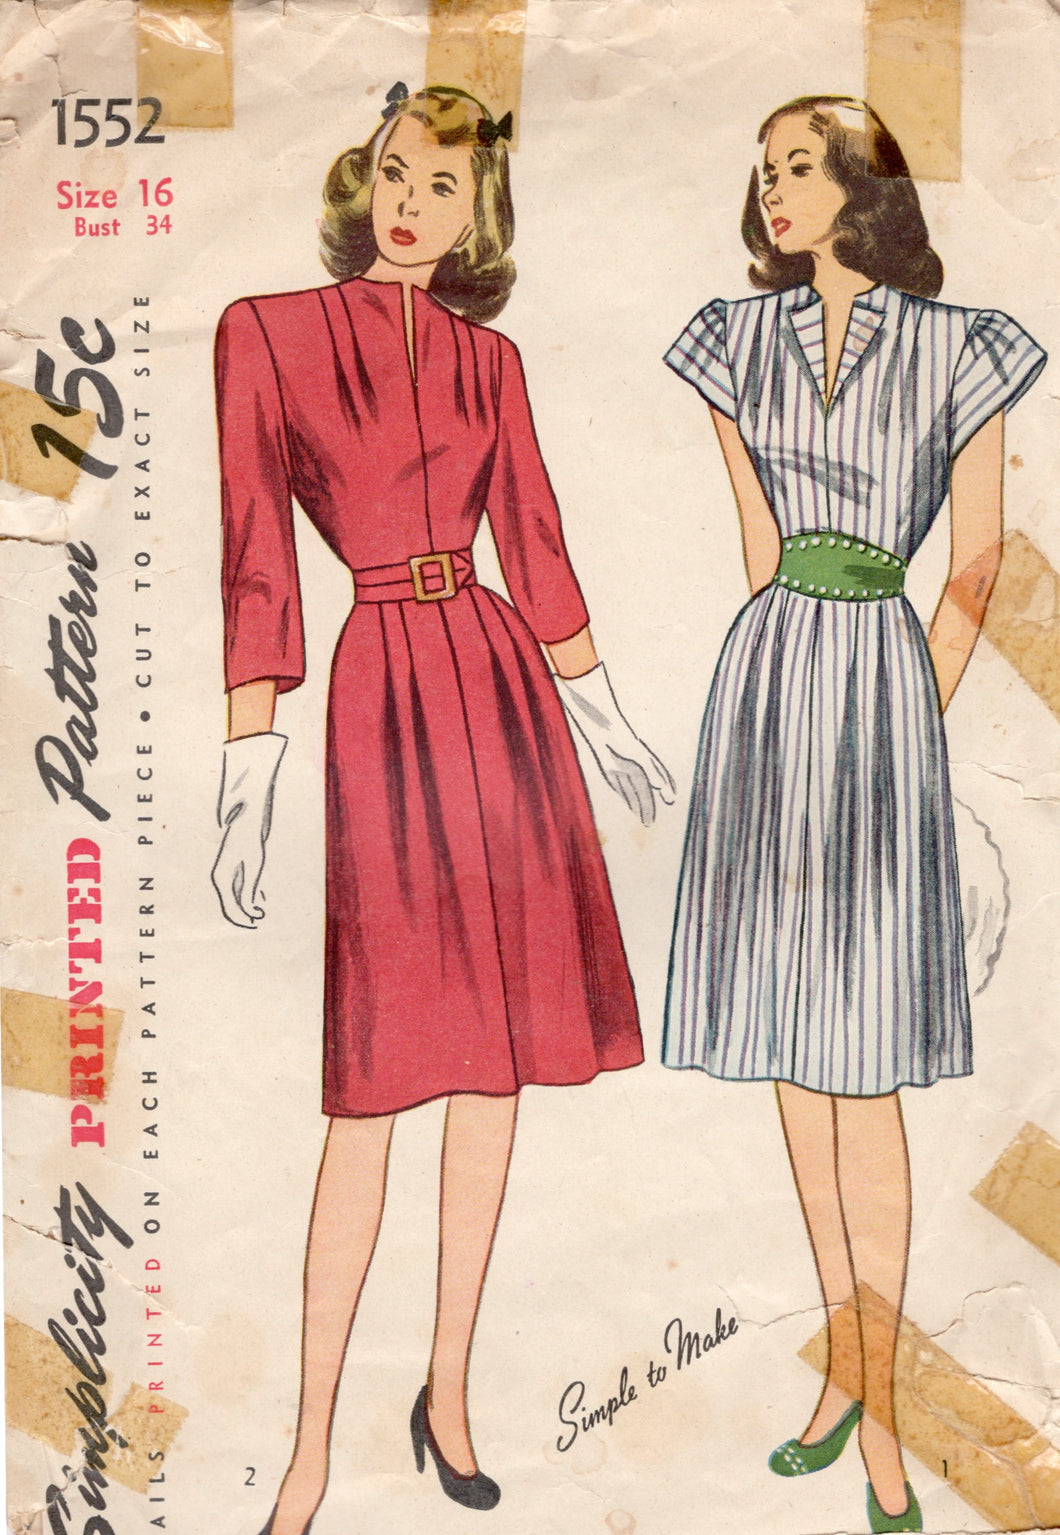 1940's Simplicity One Piece Dress with Tucks at Shoulders and waist - Bust 34